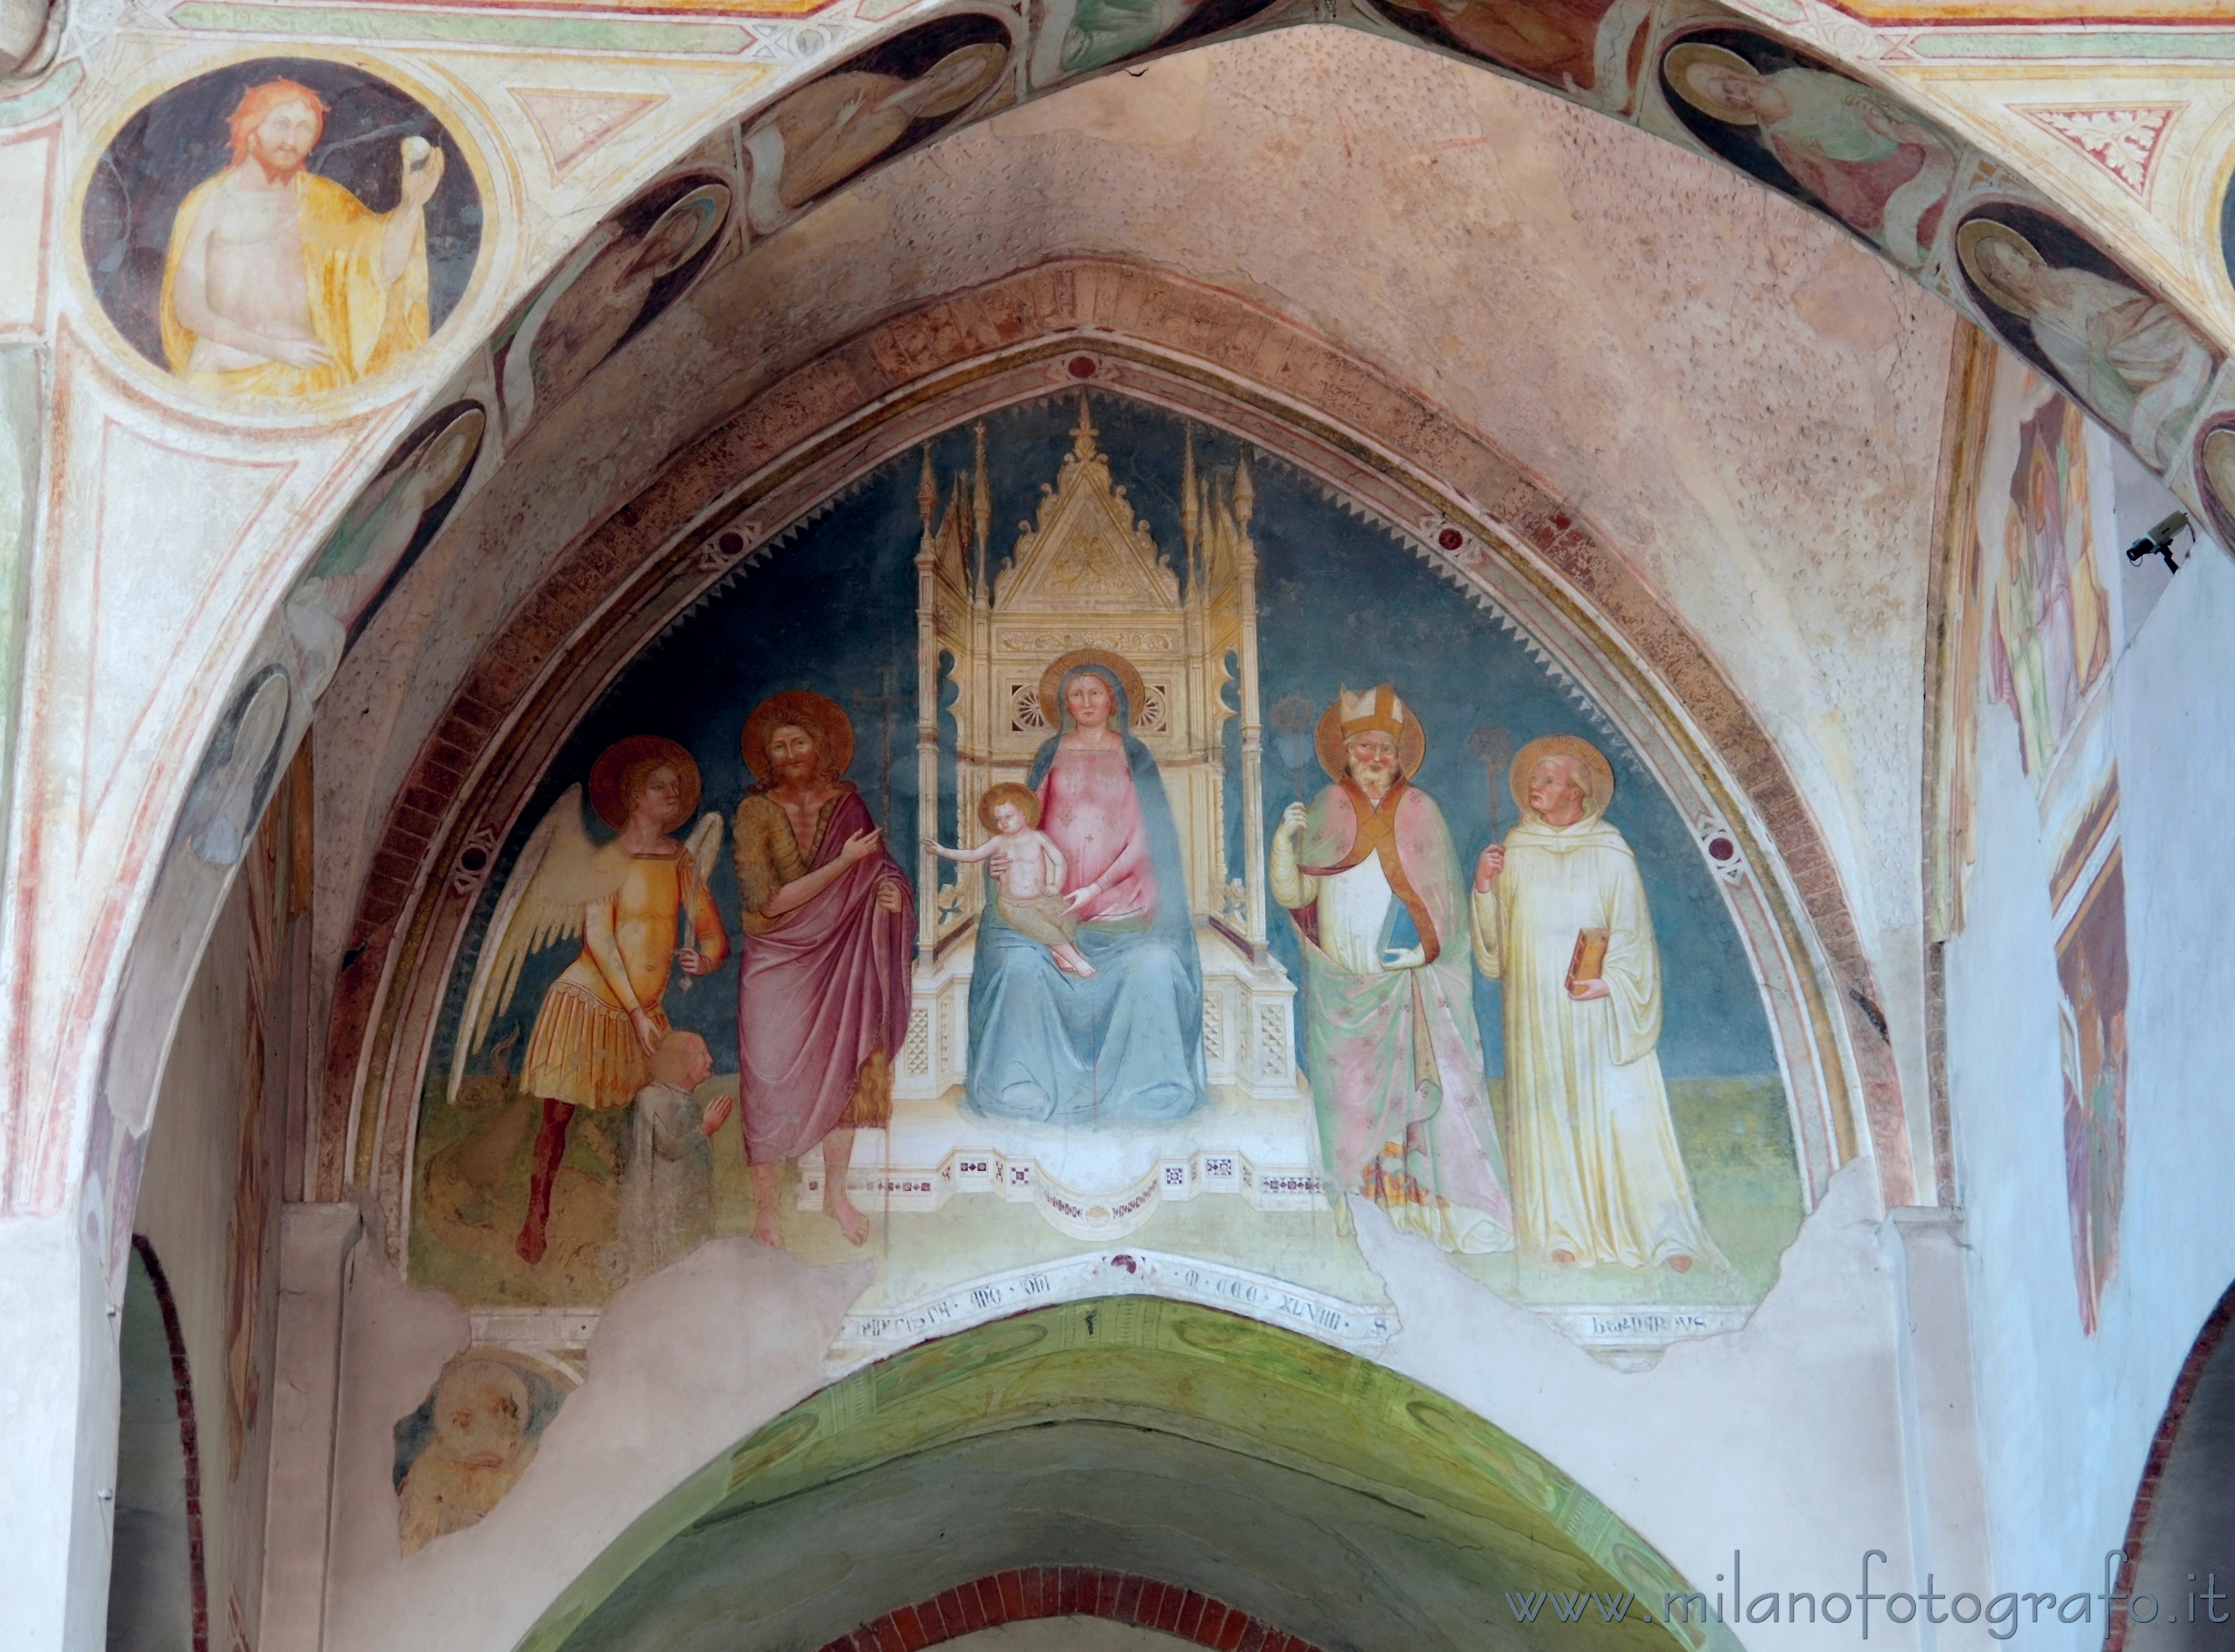 San Giuliano Milanese (Milan, Italy): Fresco of the Virgin in Majesty with Saints in the Abbey of Viboldone - San Giuliano Milanese (Milan, Italy)